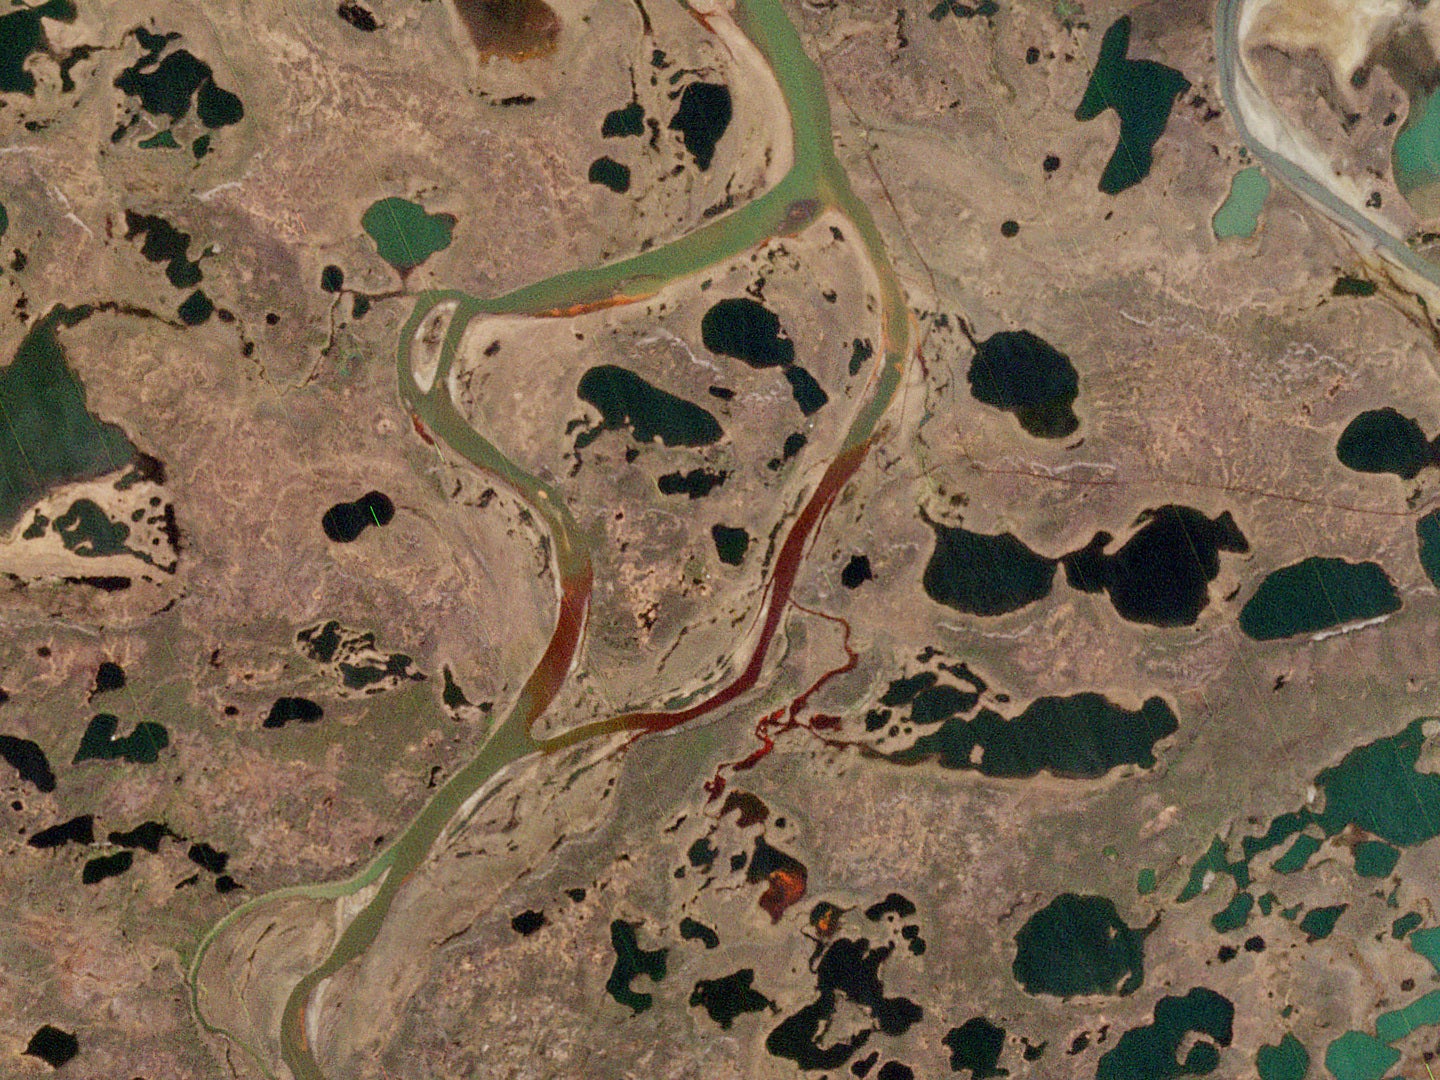 Image captured by the Copernicus Sentinel-2 mission on Saturday, 31 May, shows the extent of the oil spill, in red, near the power plant